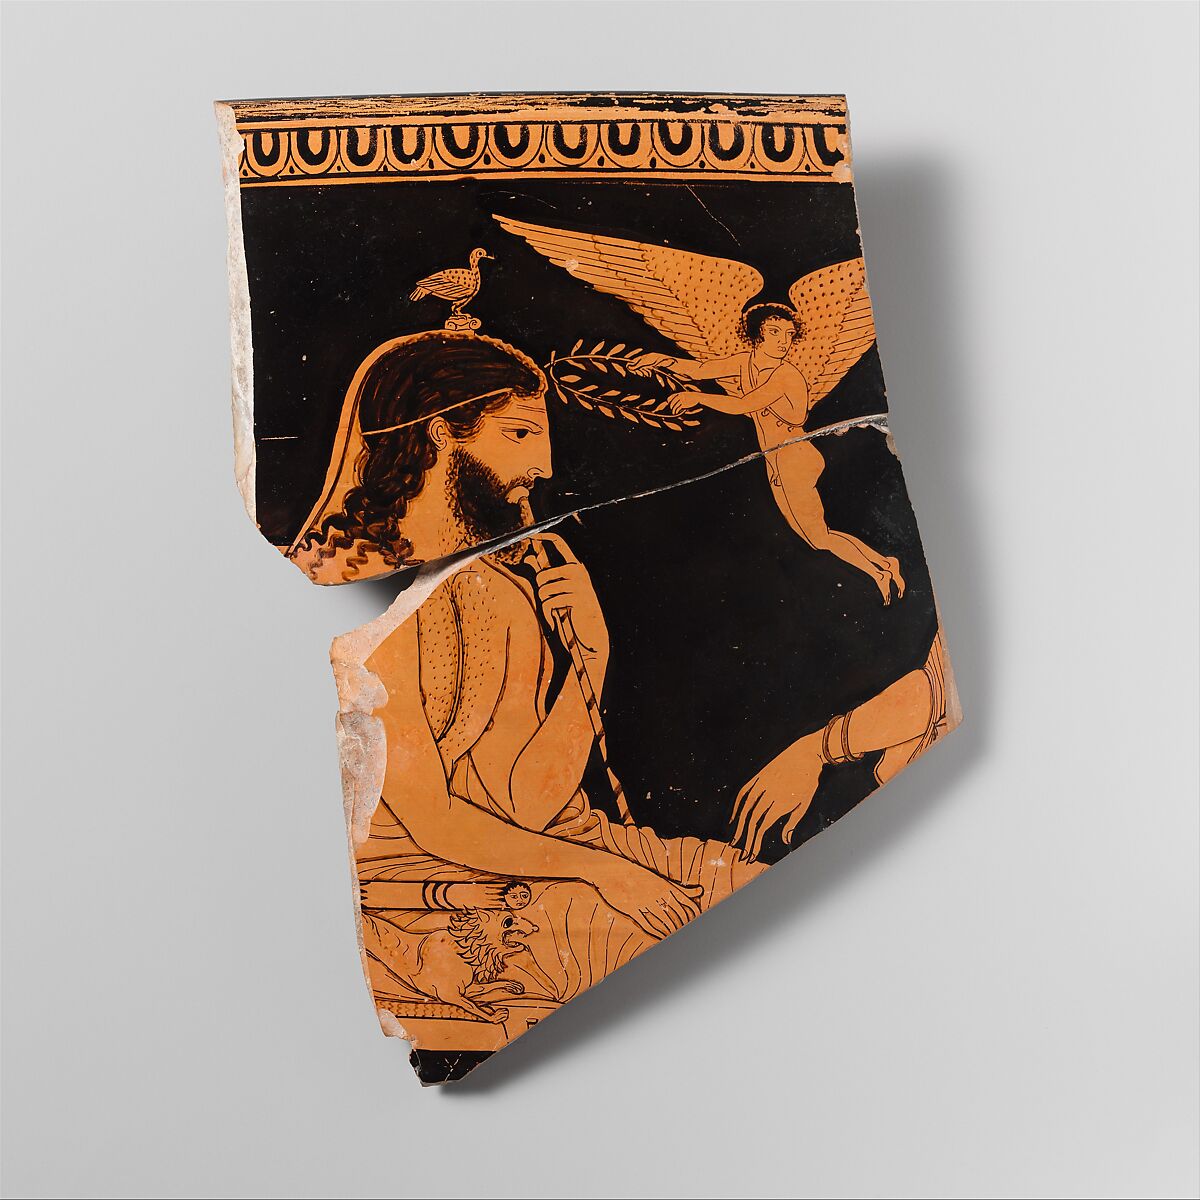 Fragment of a terracotta skyphos (deep drinking cup), Attributed to the Palermo Painter, Terracotta, Greek, South Italian, Lucanian 